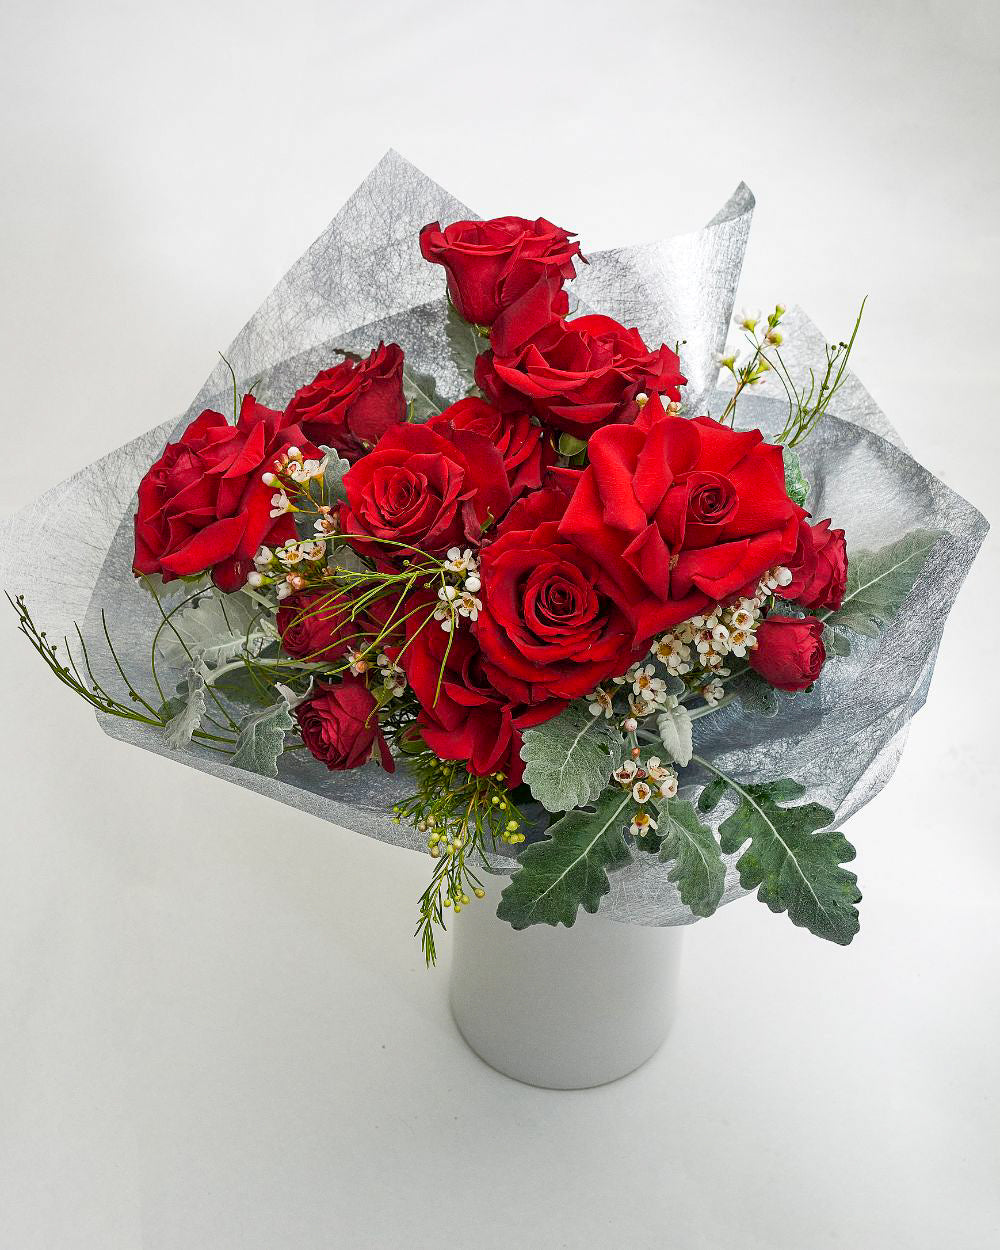 Classic red rose bouquet in vase – romantic gift from Sydney florist, ideal for anniversaries.